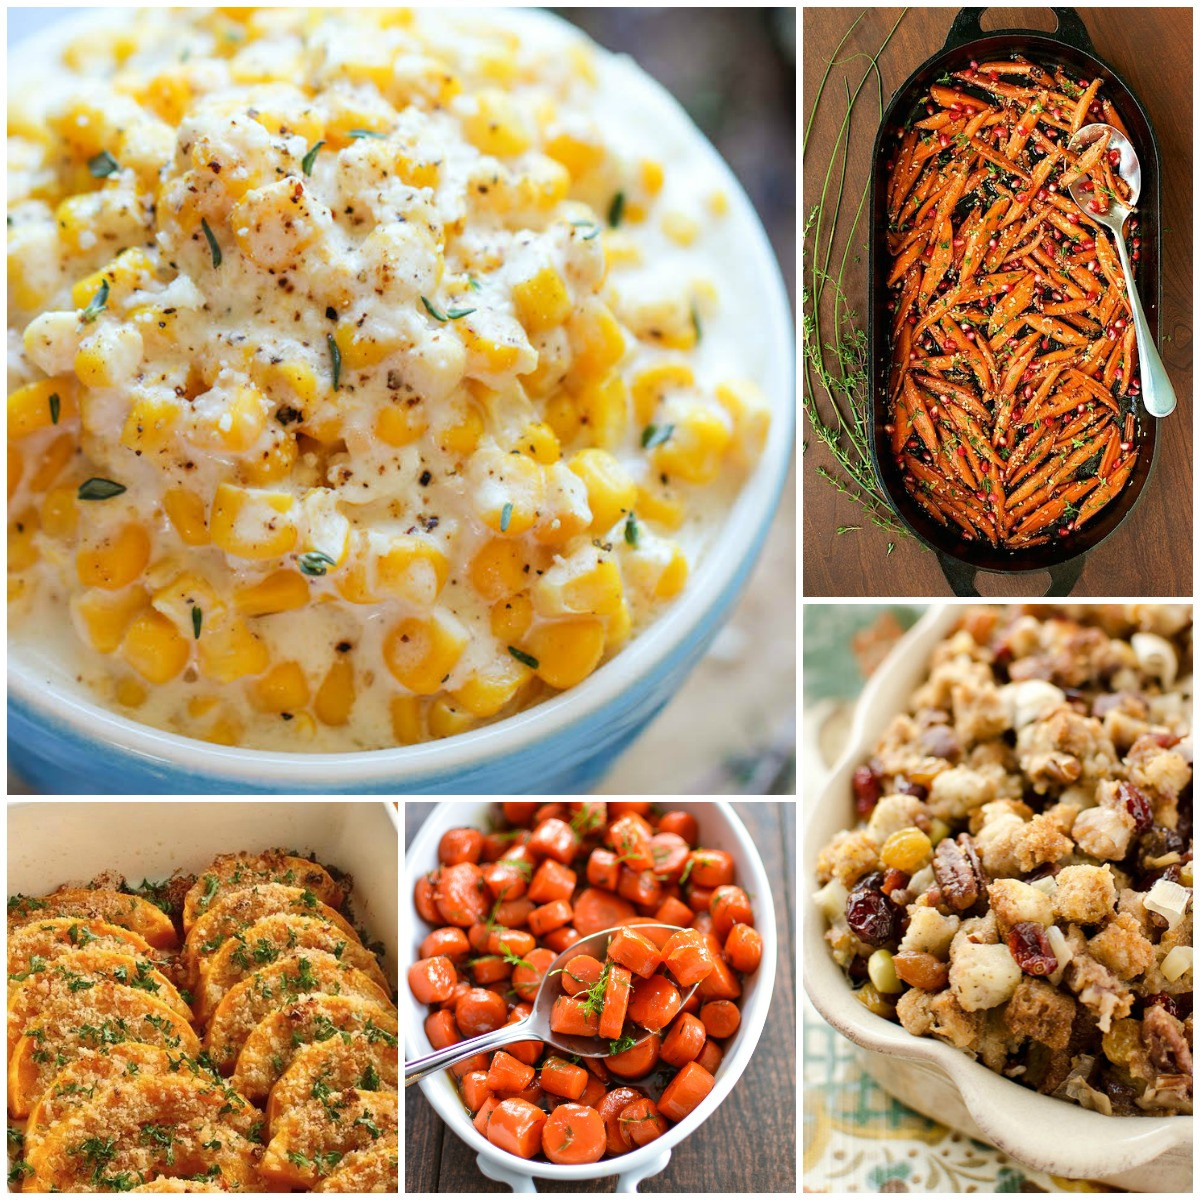 Thanksgiving Side Dishes
 25 Most Pinned Side Dish Recipes for Thanksgiving and